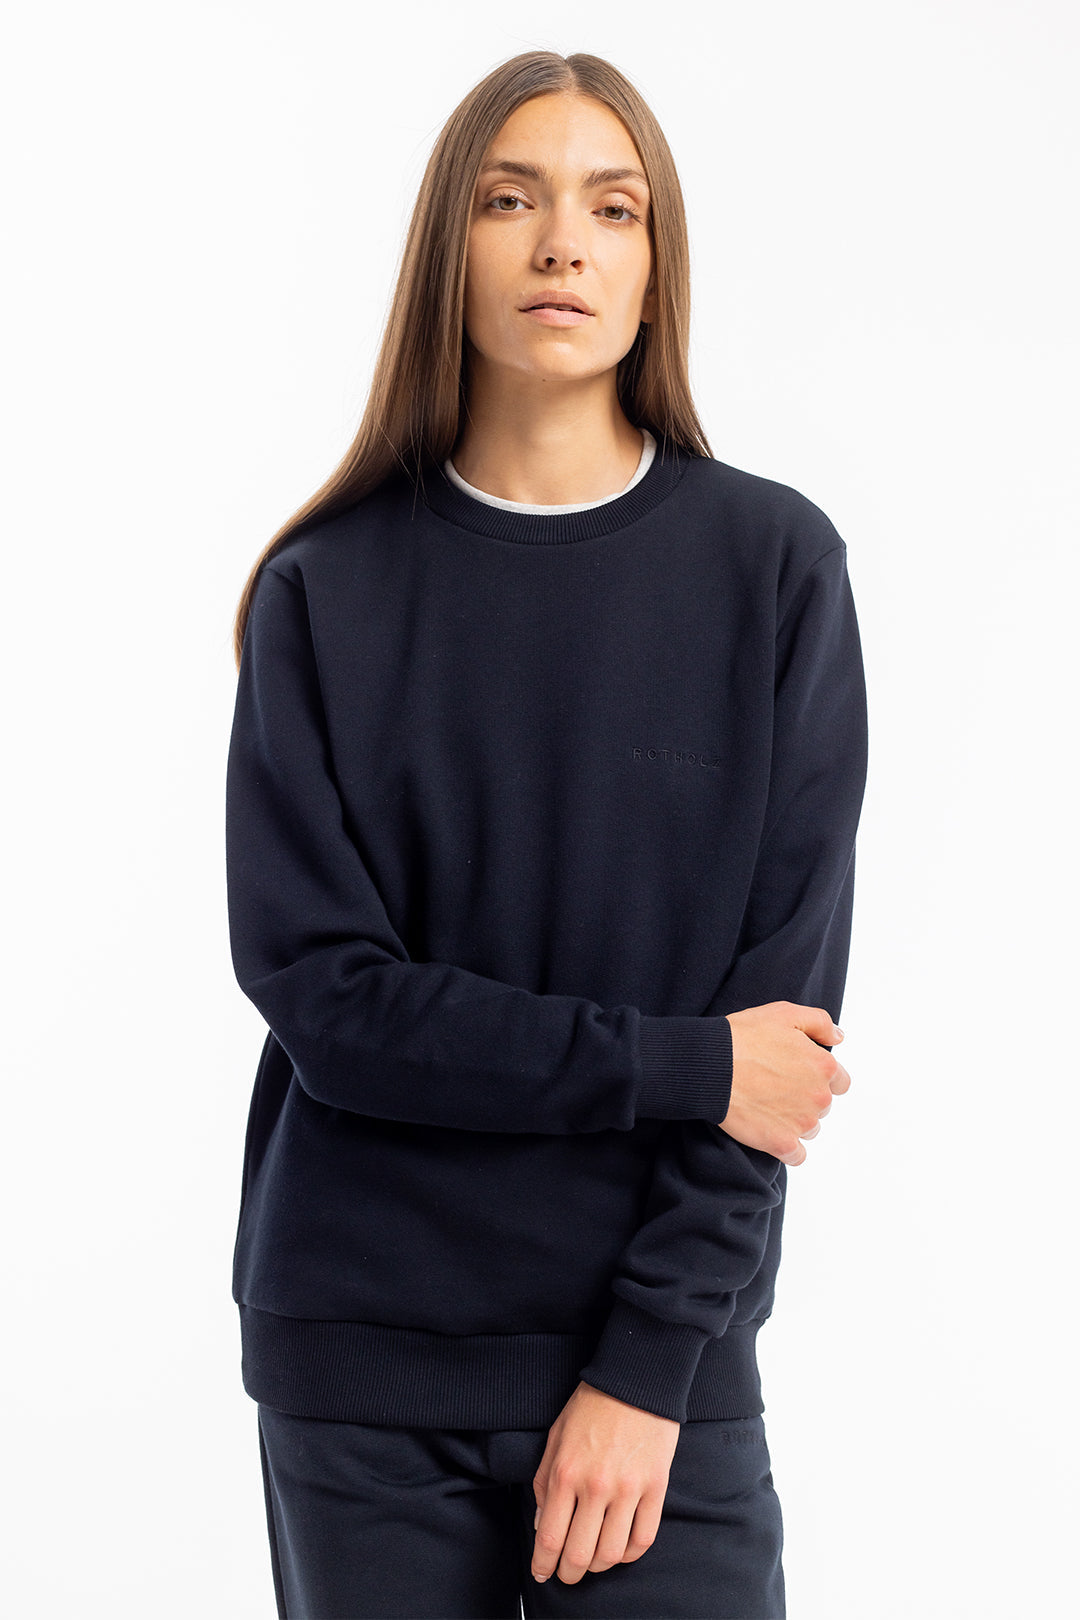 Black sweater logo made of organic cotton from Rotholz